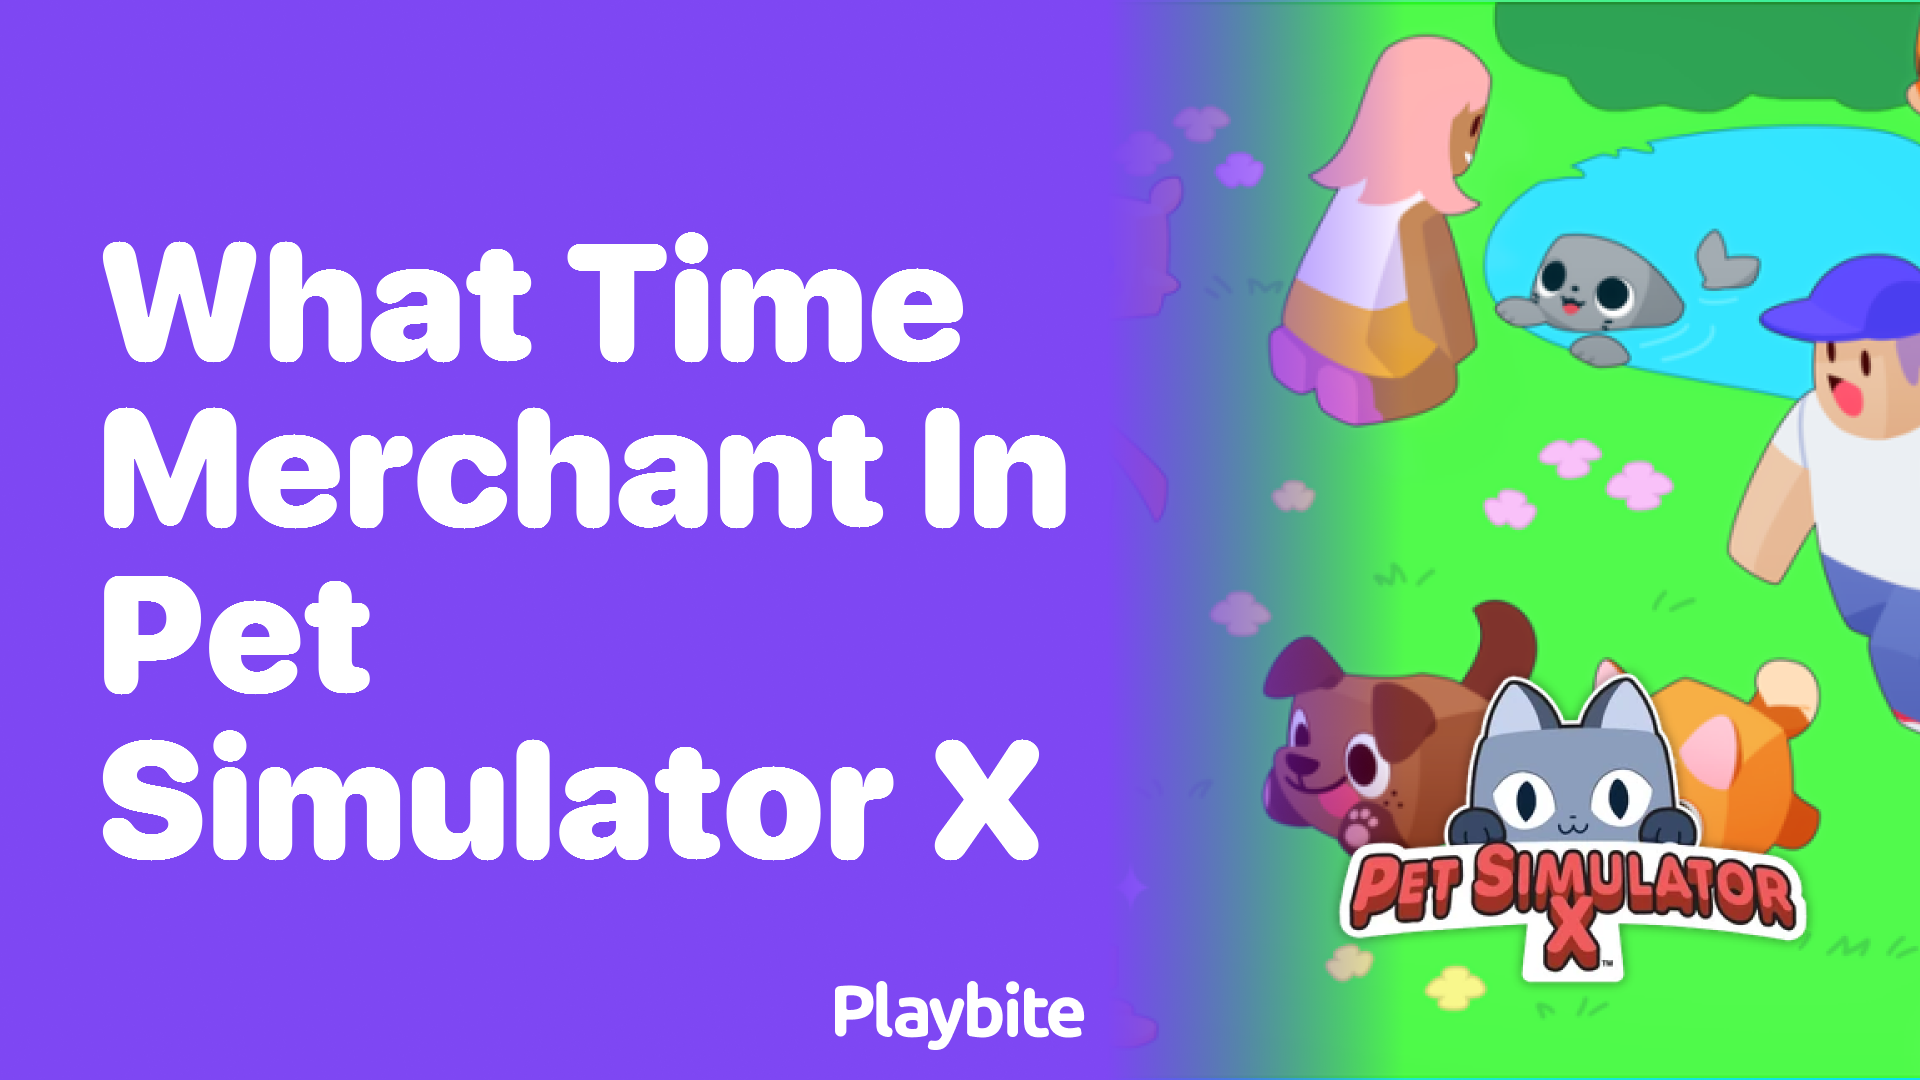 What Time Does the Merchant Appear in Pet Simulator X?